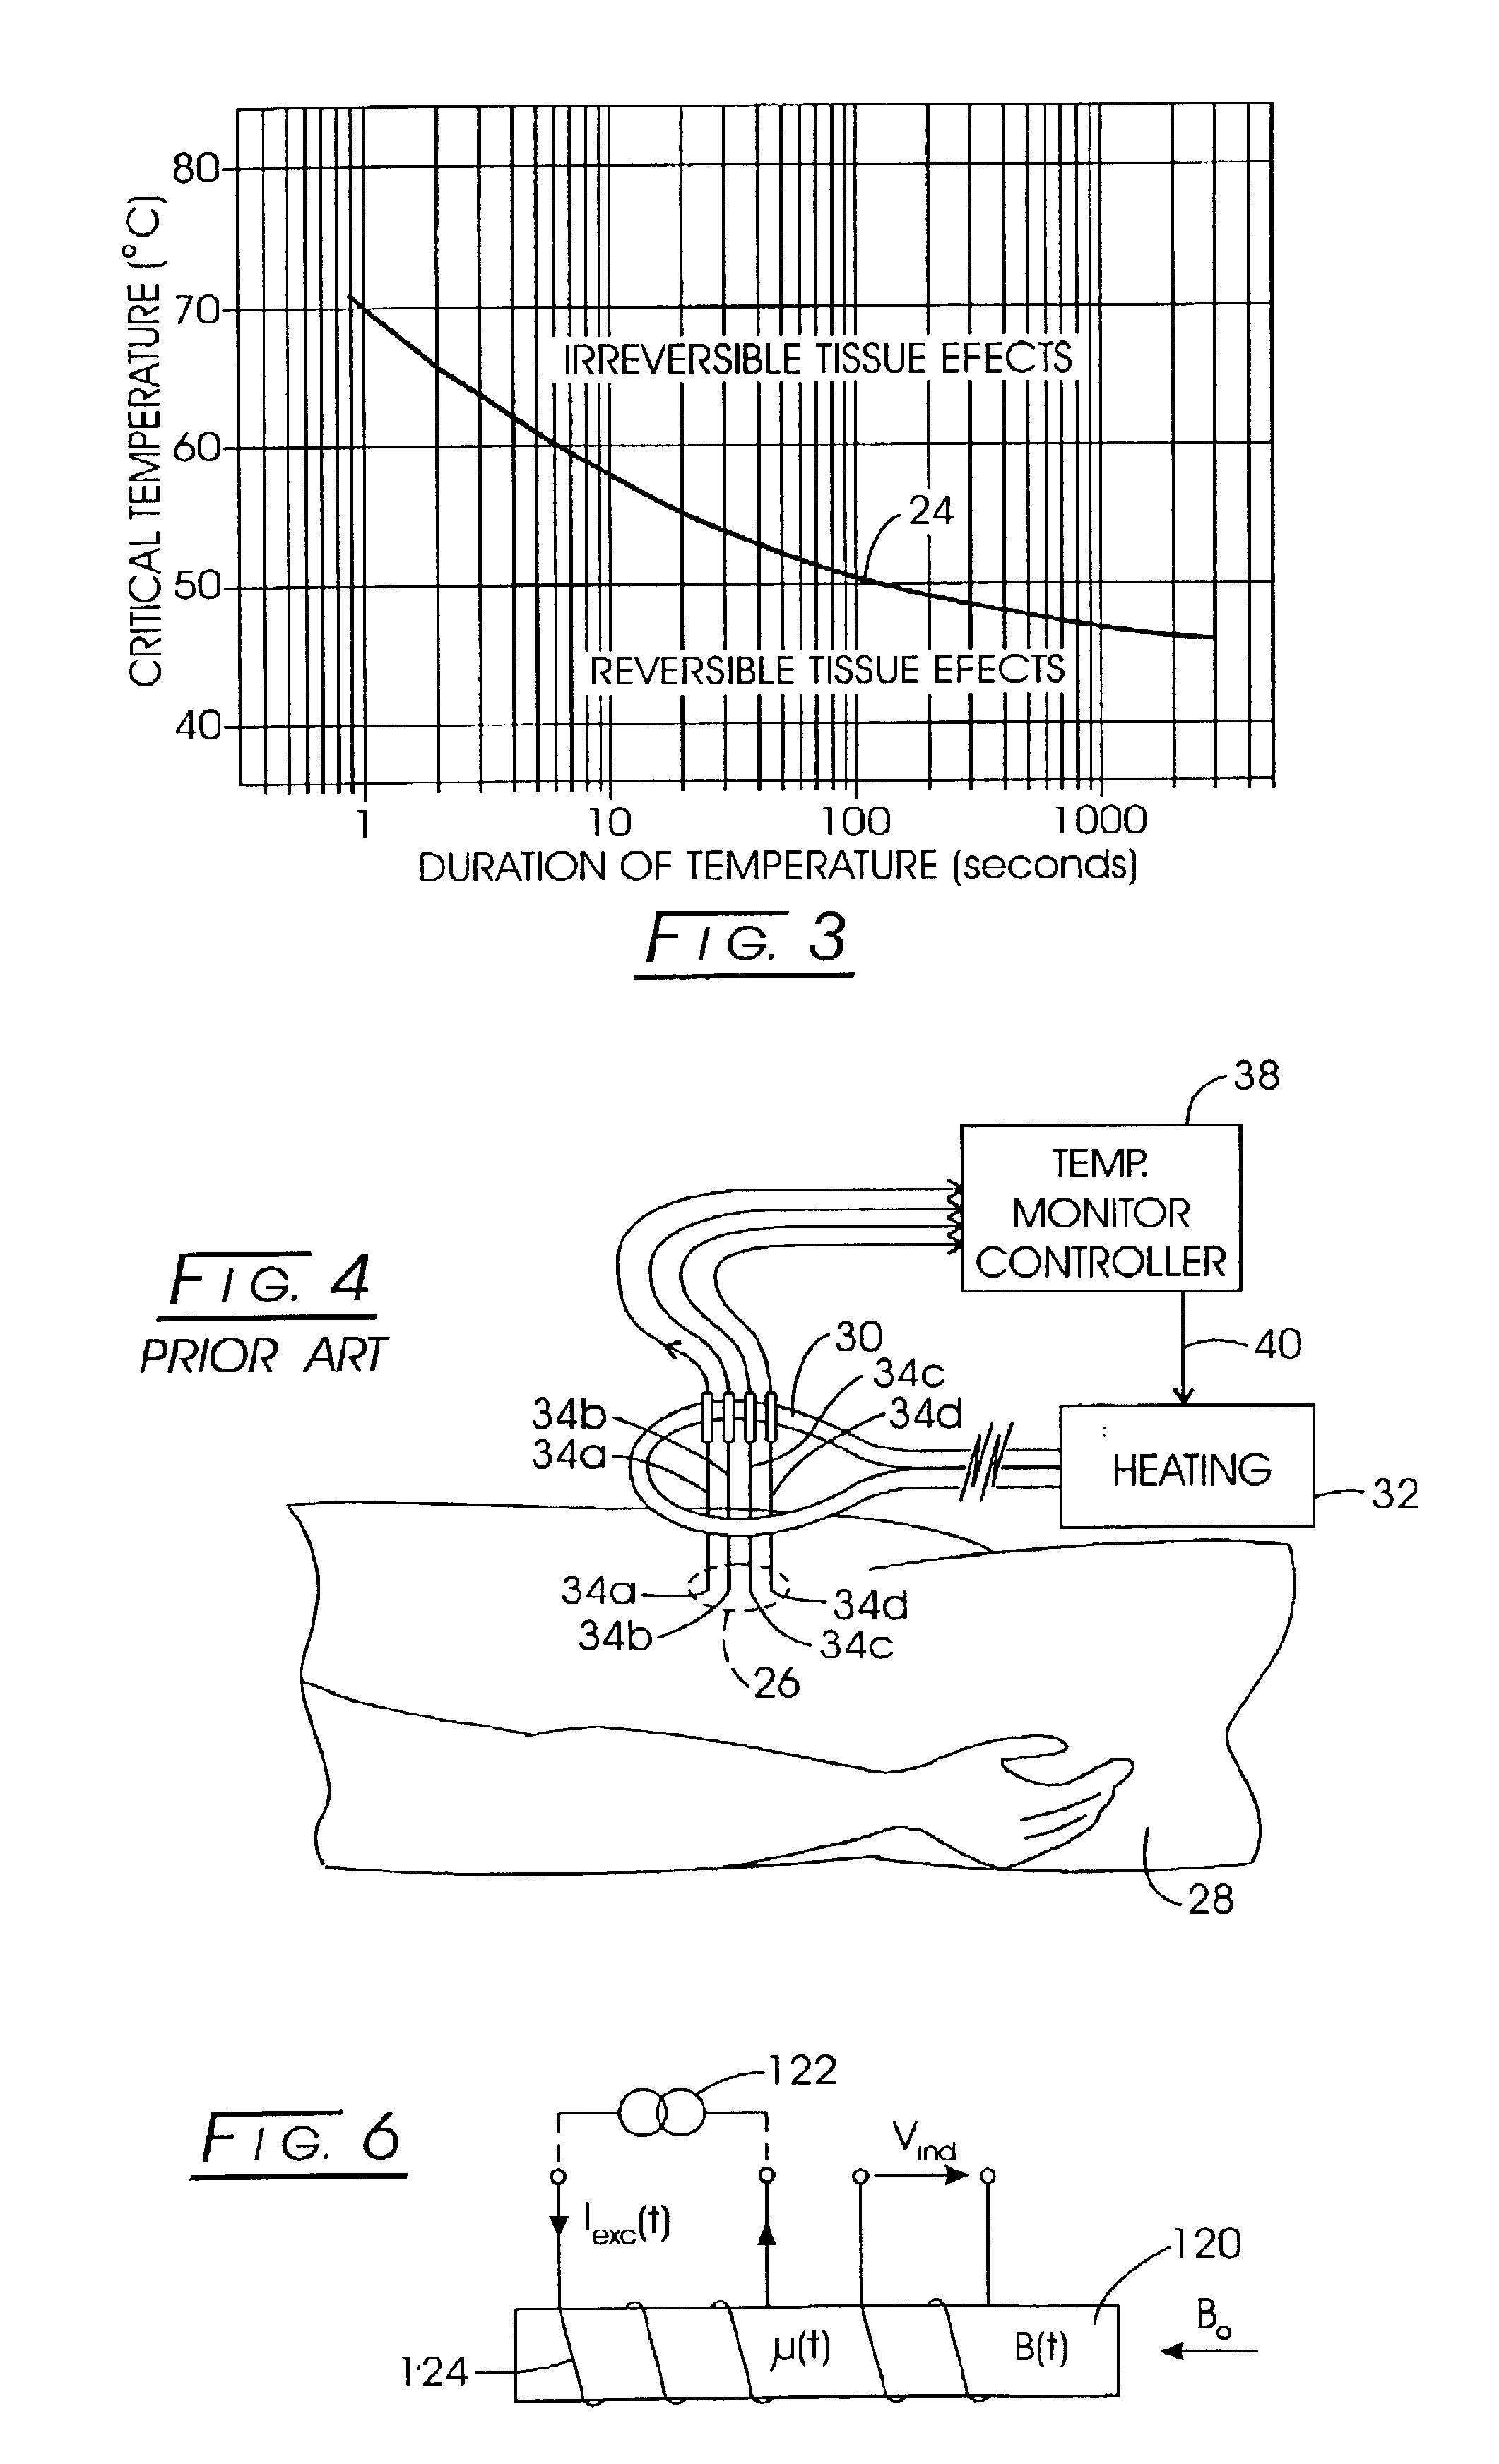 System method and apparatus for localized heating of tissue